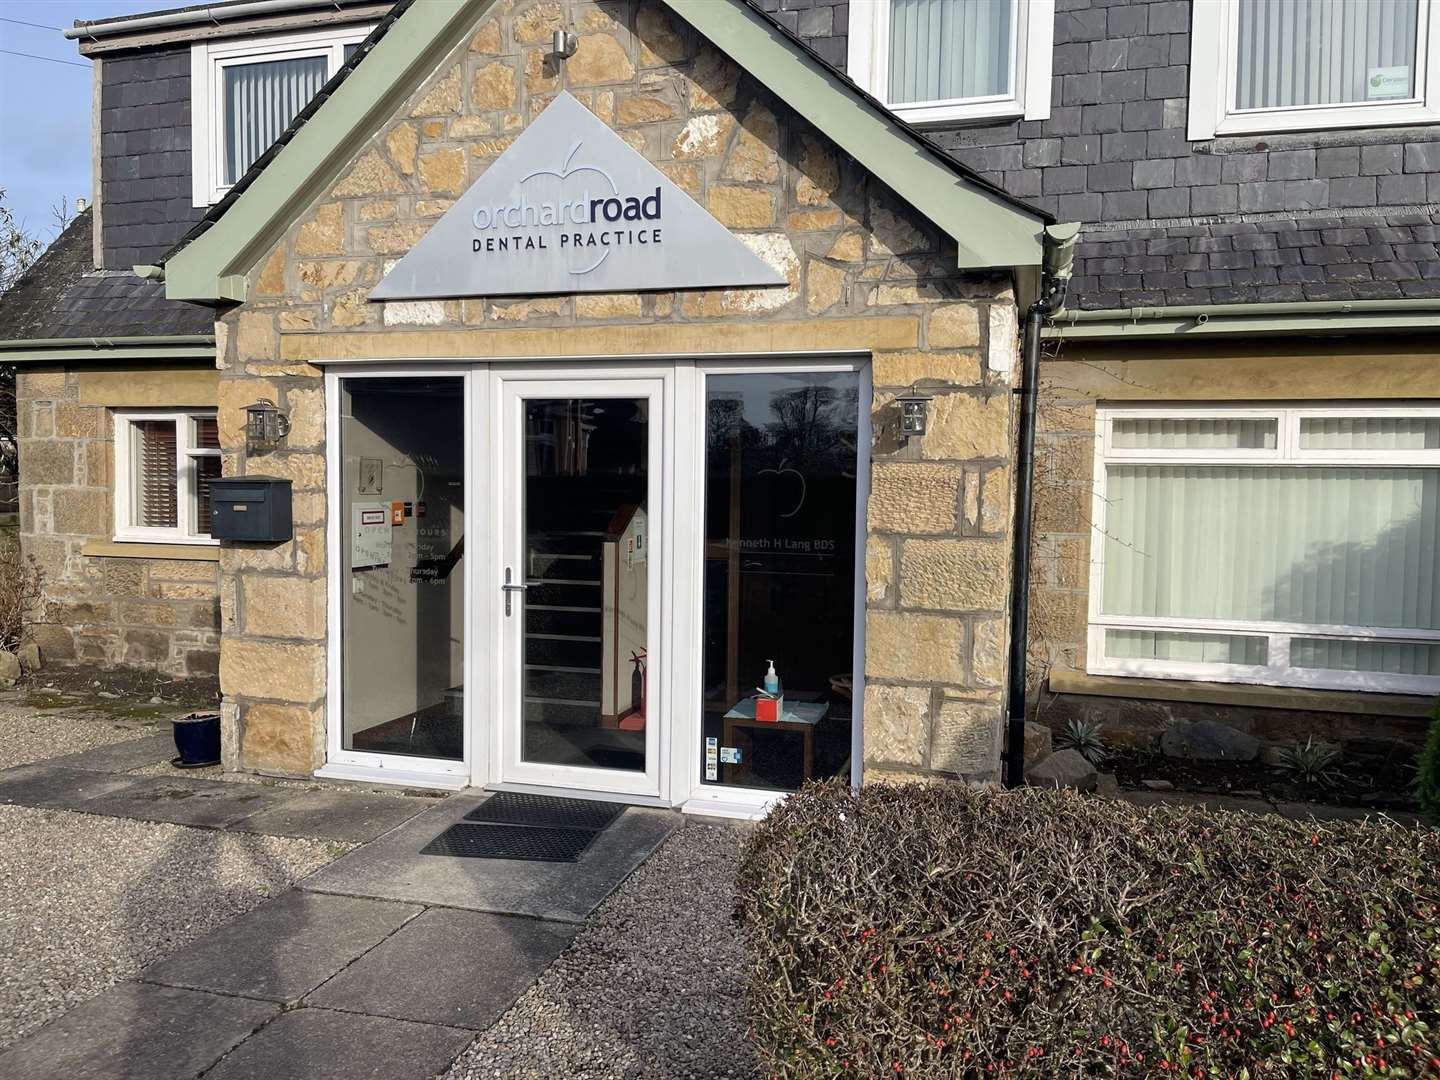 Orchard Road Dental Practice is now under new ownership